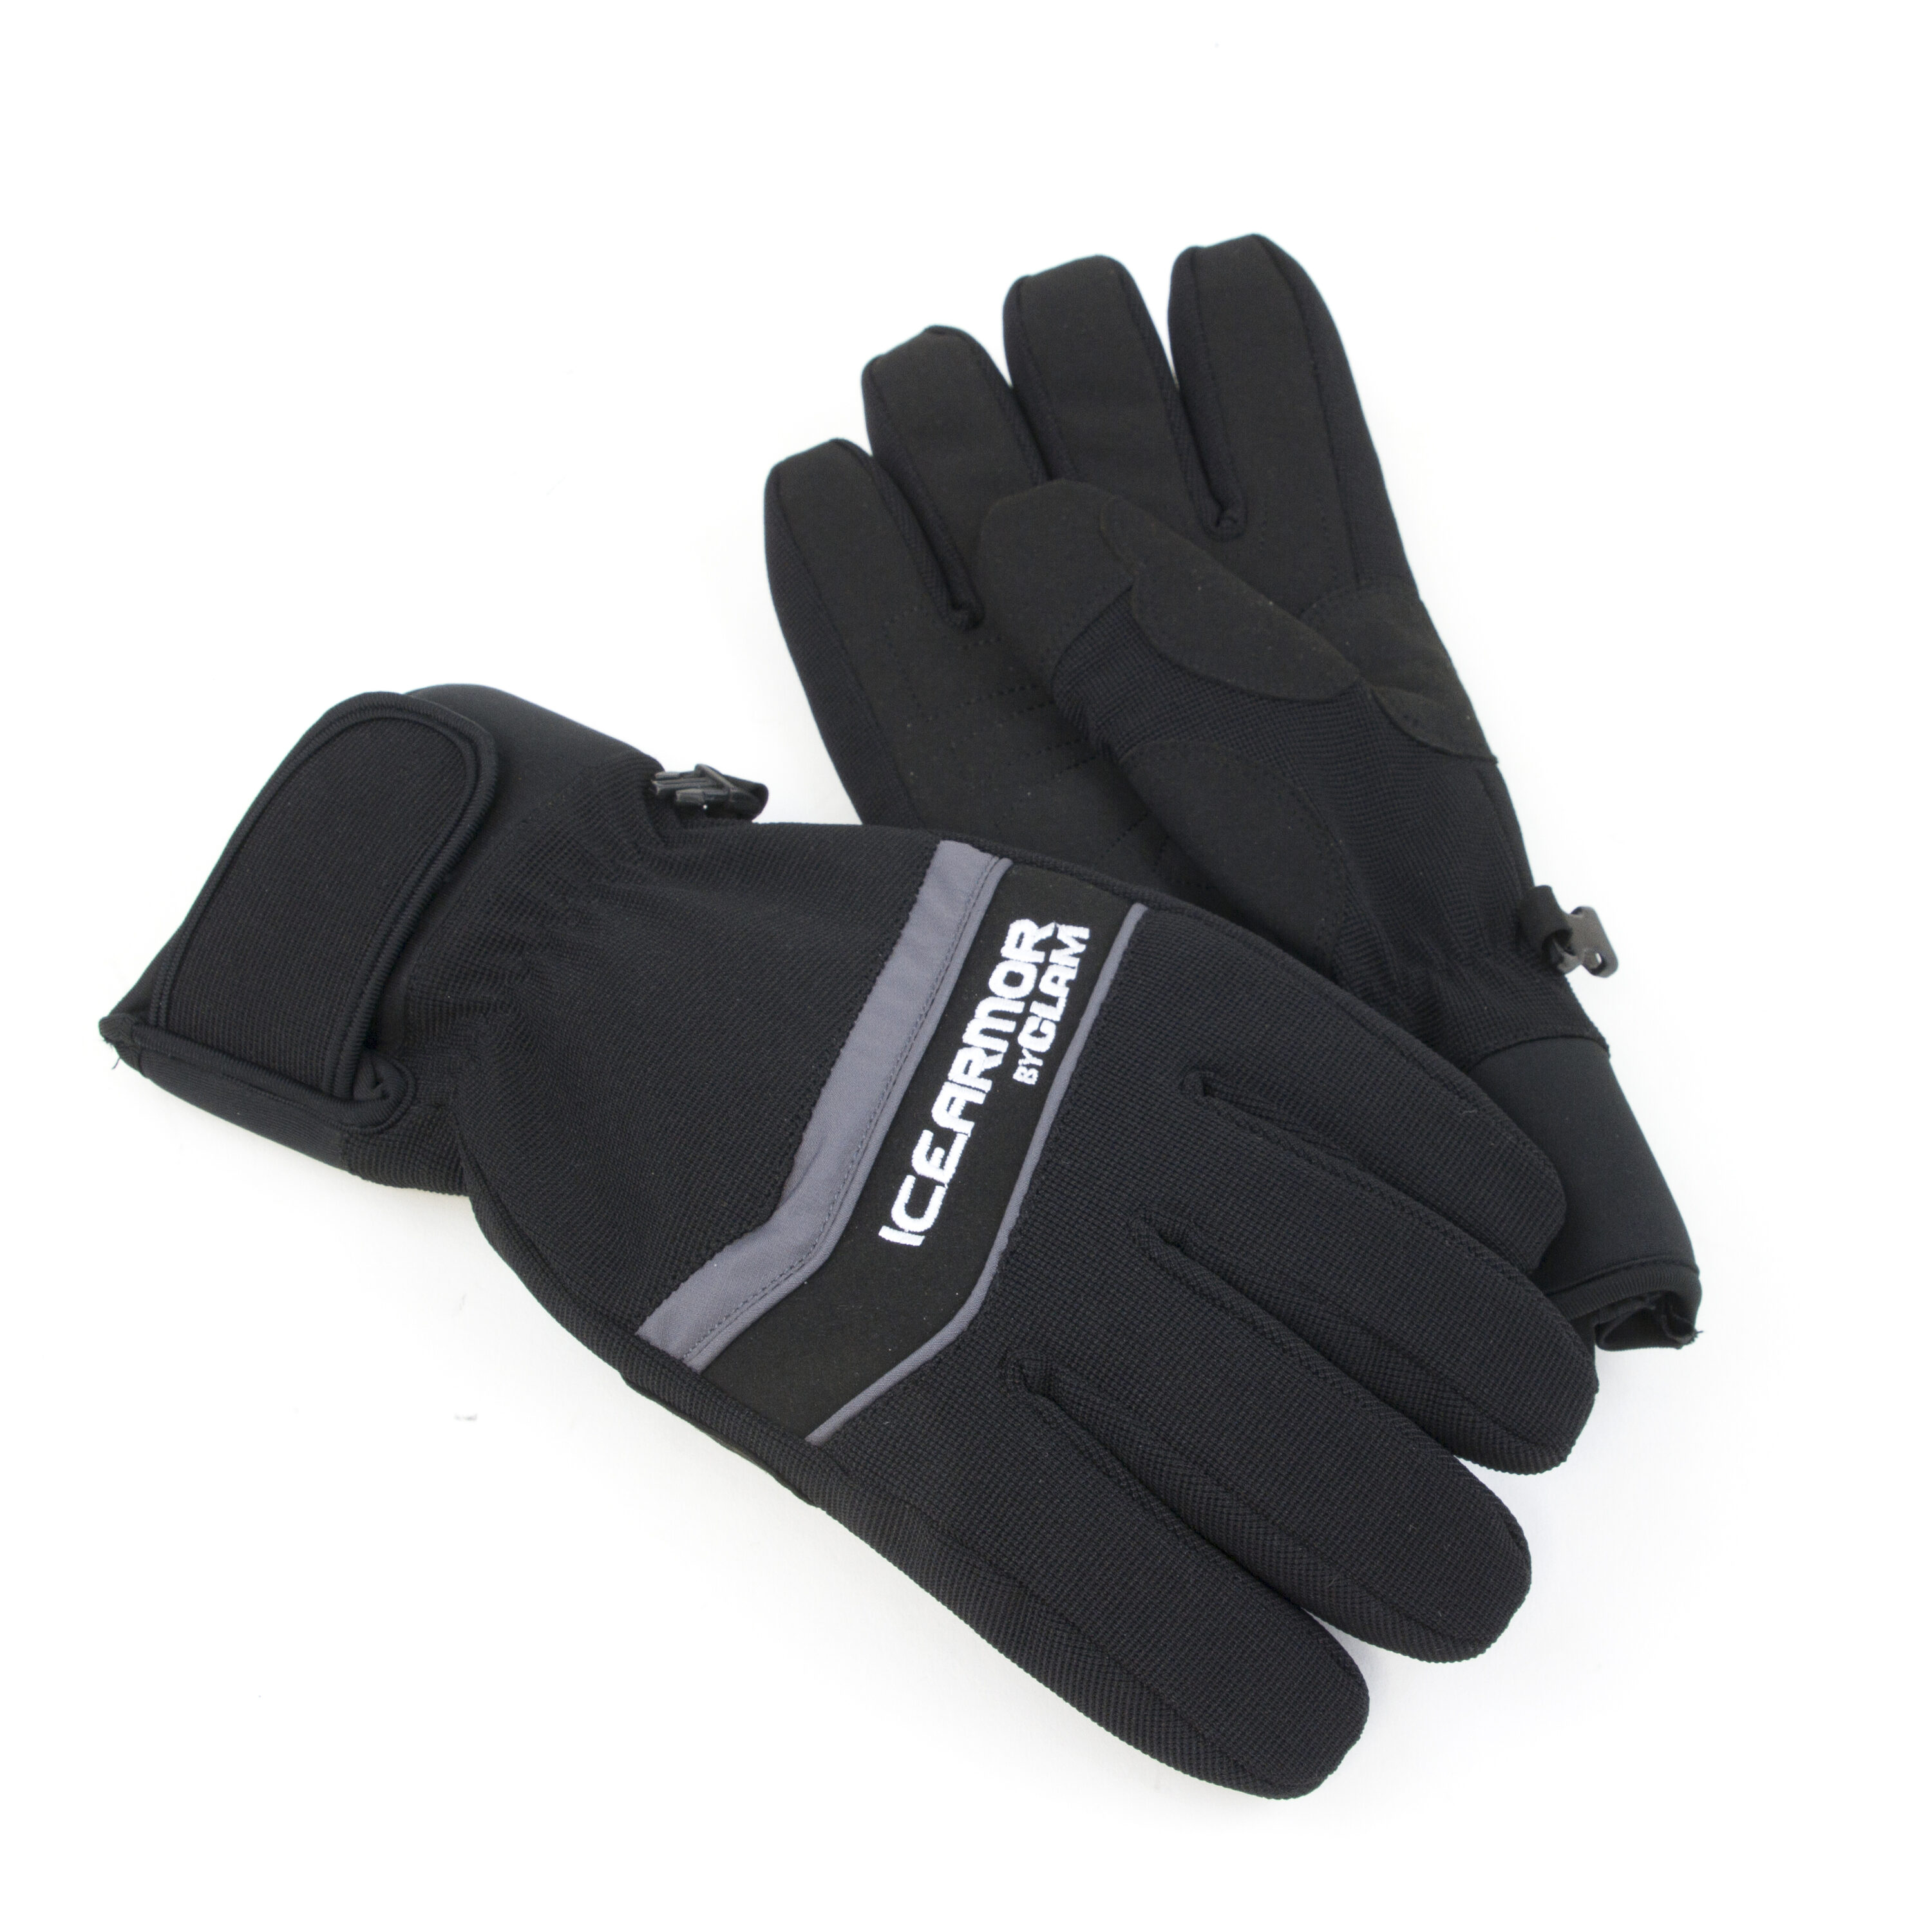 Clam Outdoors Edge Men's Ice Fishing Gloves - Black, L/XL, Thinsulate  Insulation, Advanta Membrane, Pre-Curved Fingers, 3-Year Warranty in the  Fishing Gear & Apparel department at